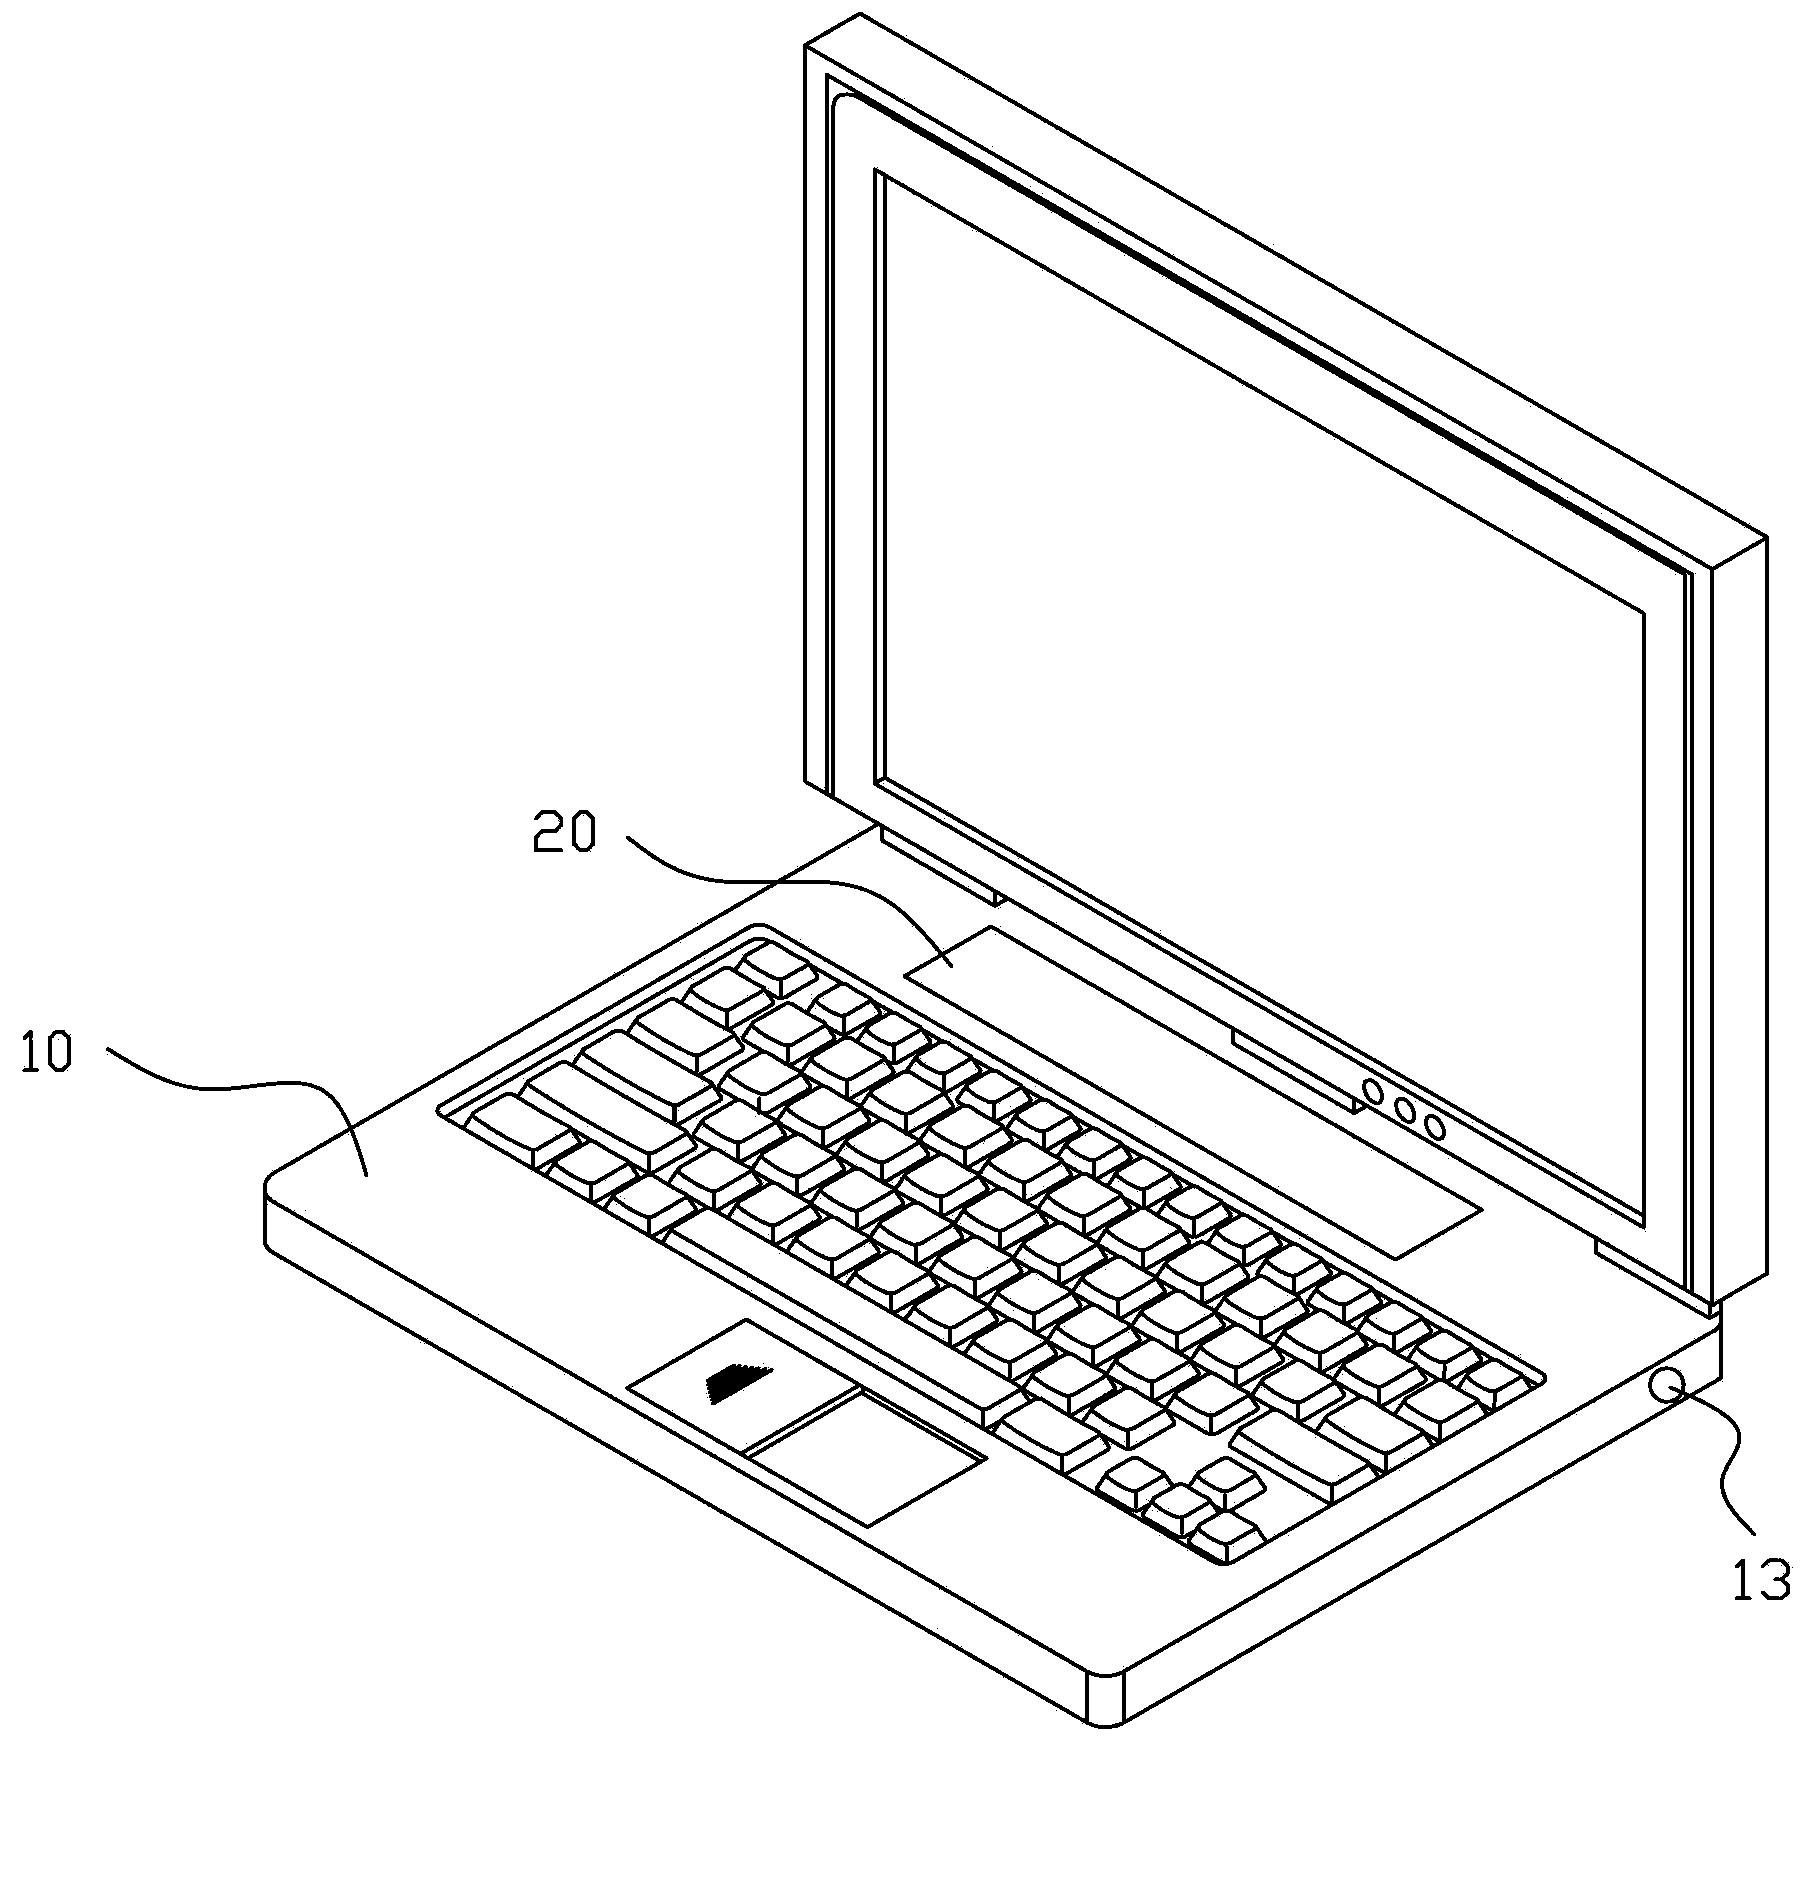 Seamless removable laptop battery